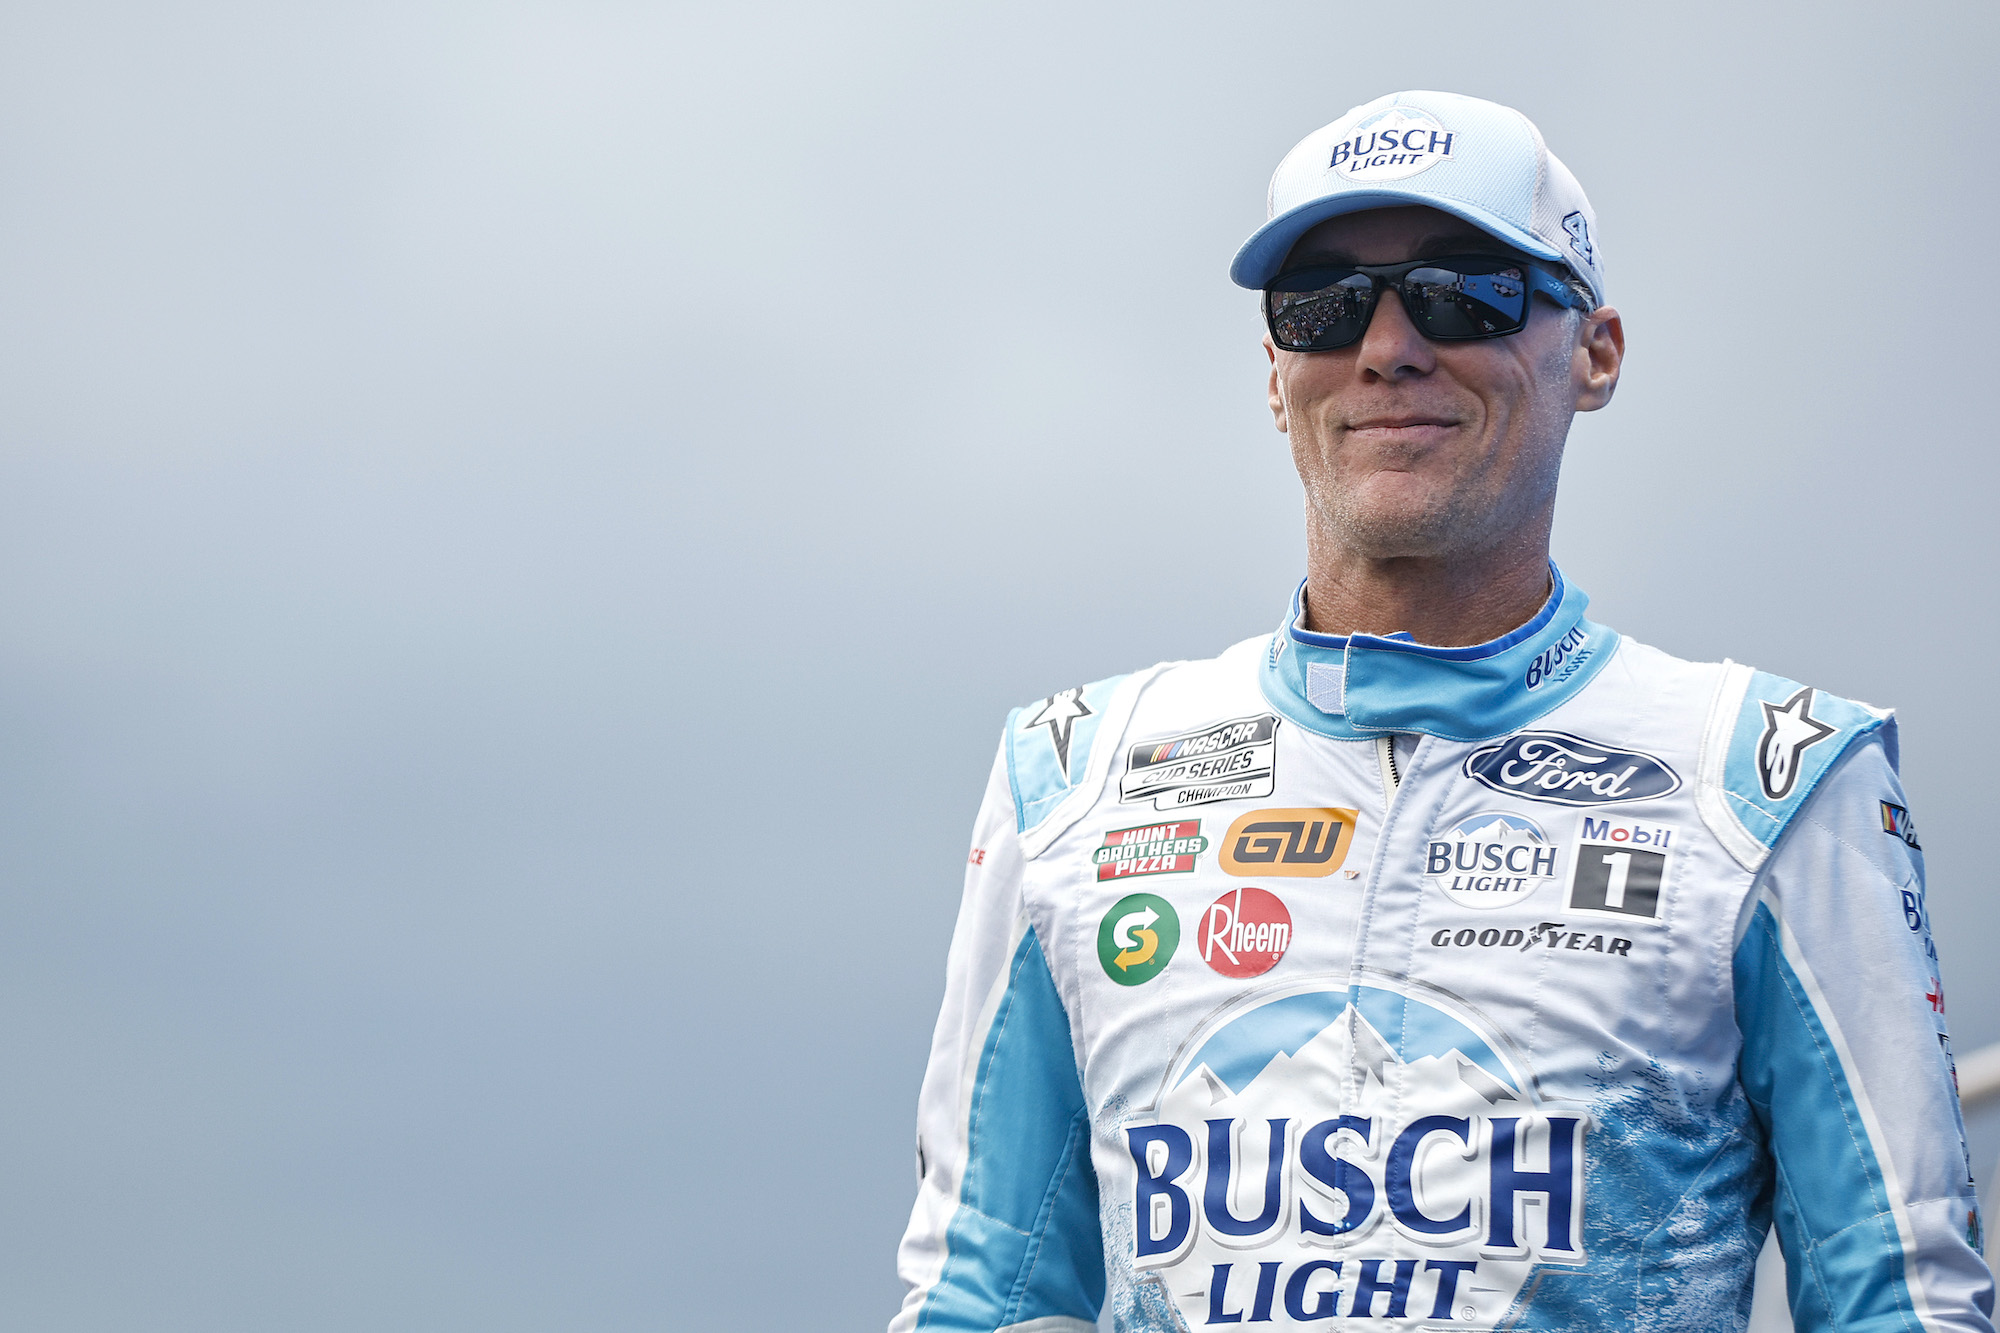 Kevin Harvick walks out on stage